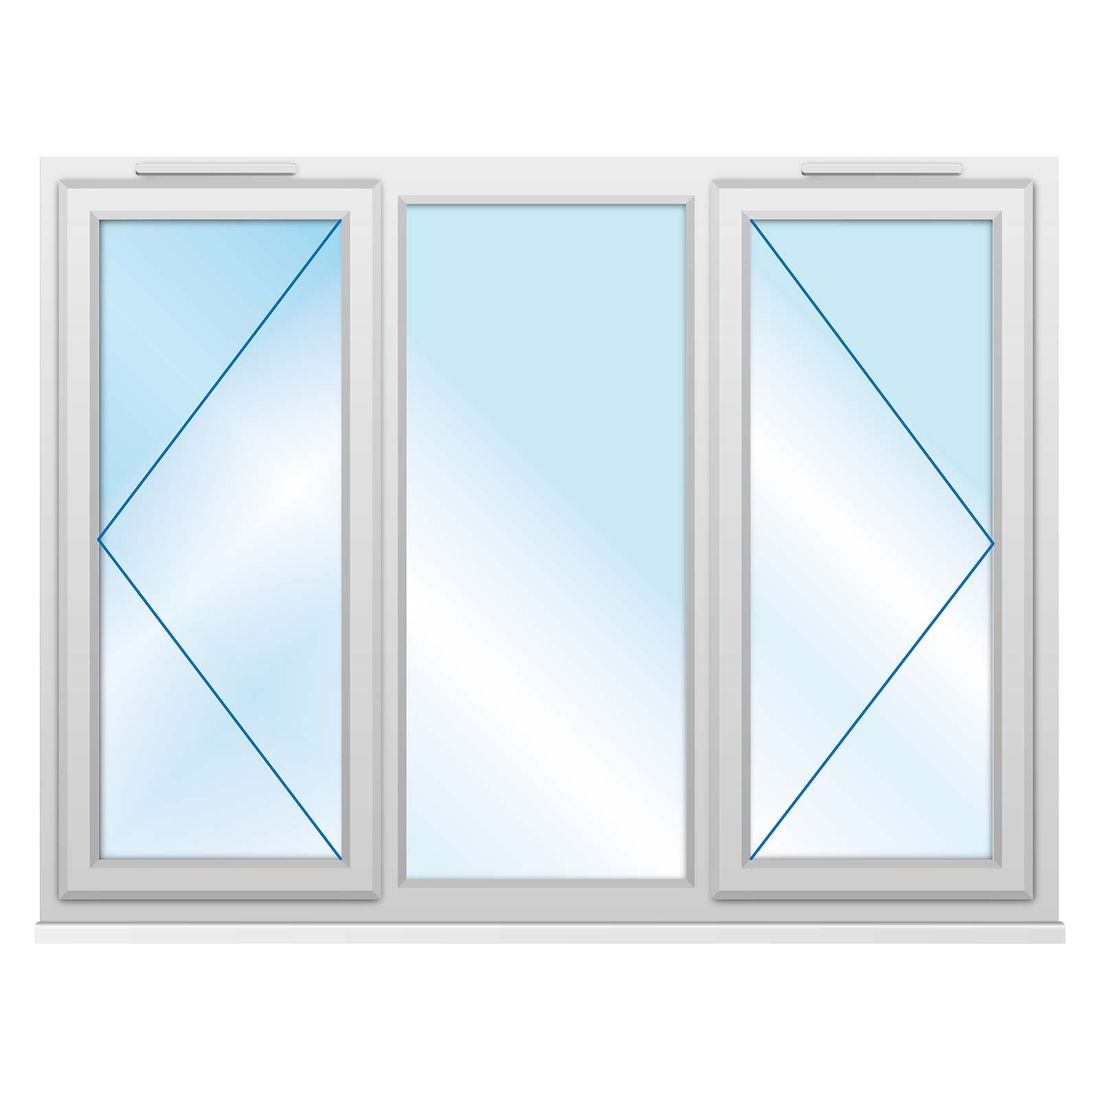 Upvc Window 1770 X 1190Mm 3P Clear Glazed A Rated